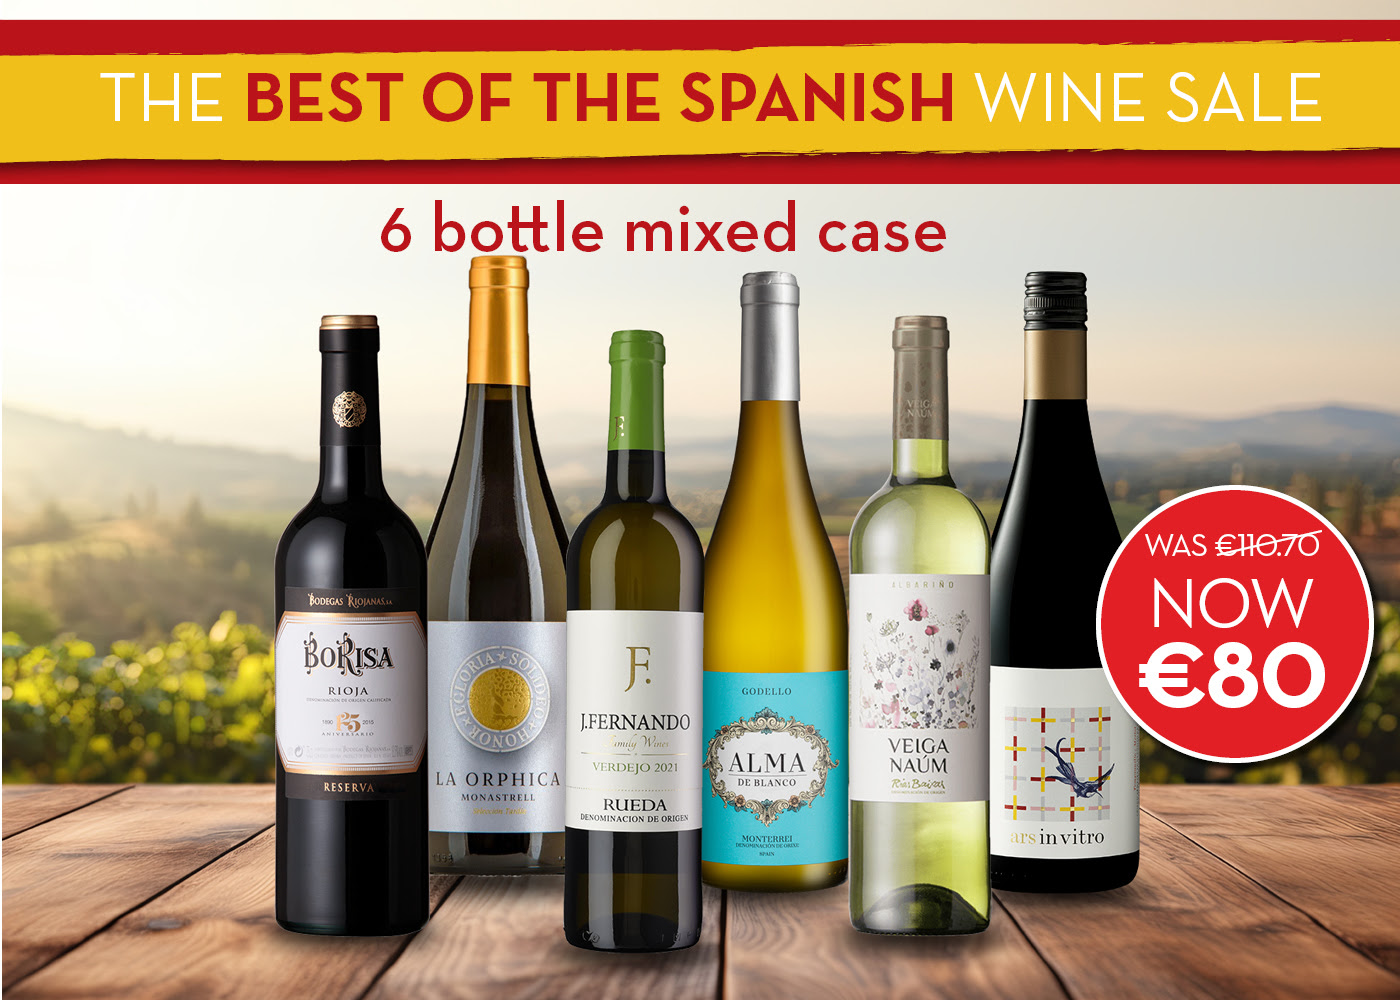 Shop Best of the Spanish Wine Sale - 6 Bottle Mixed Wine Case here